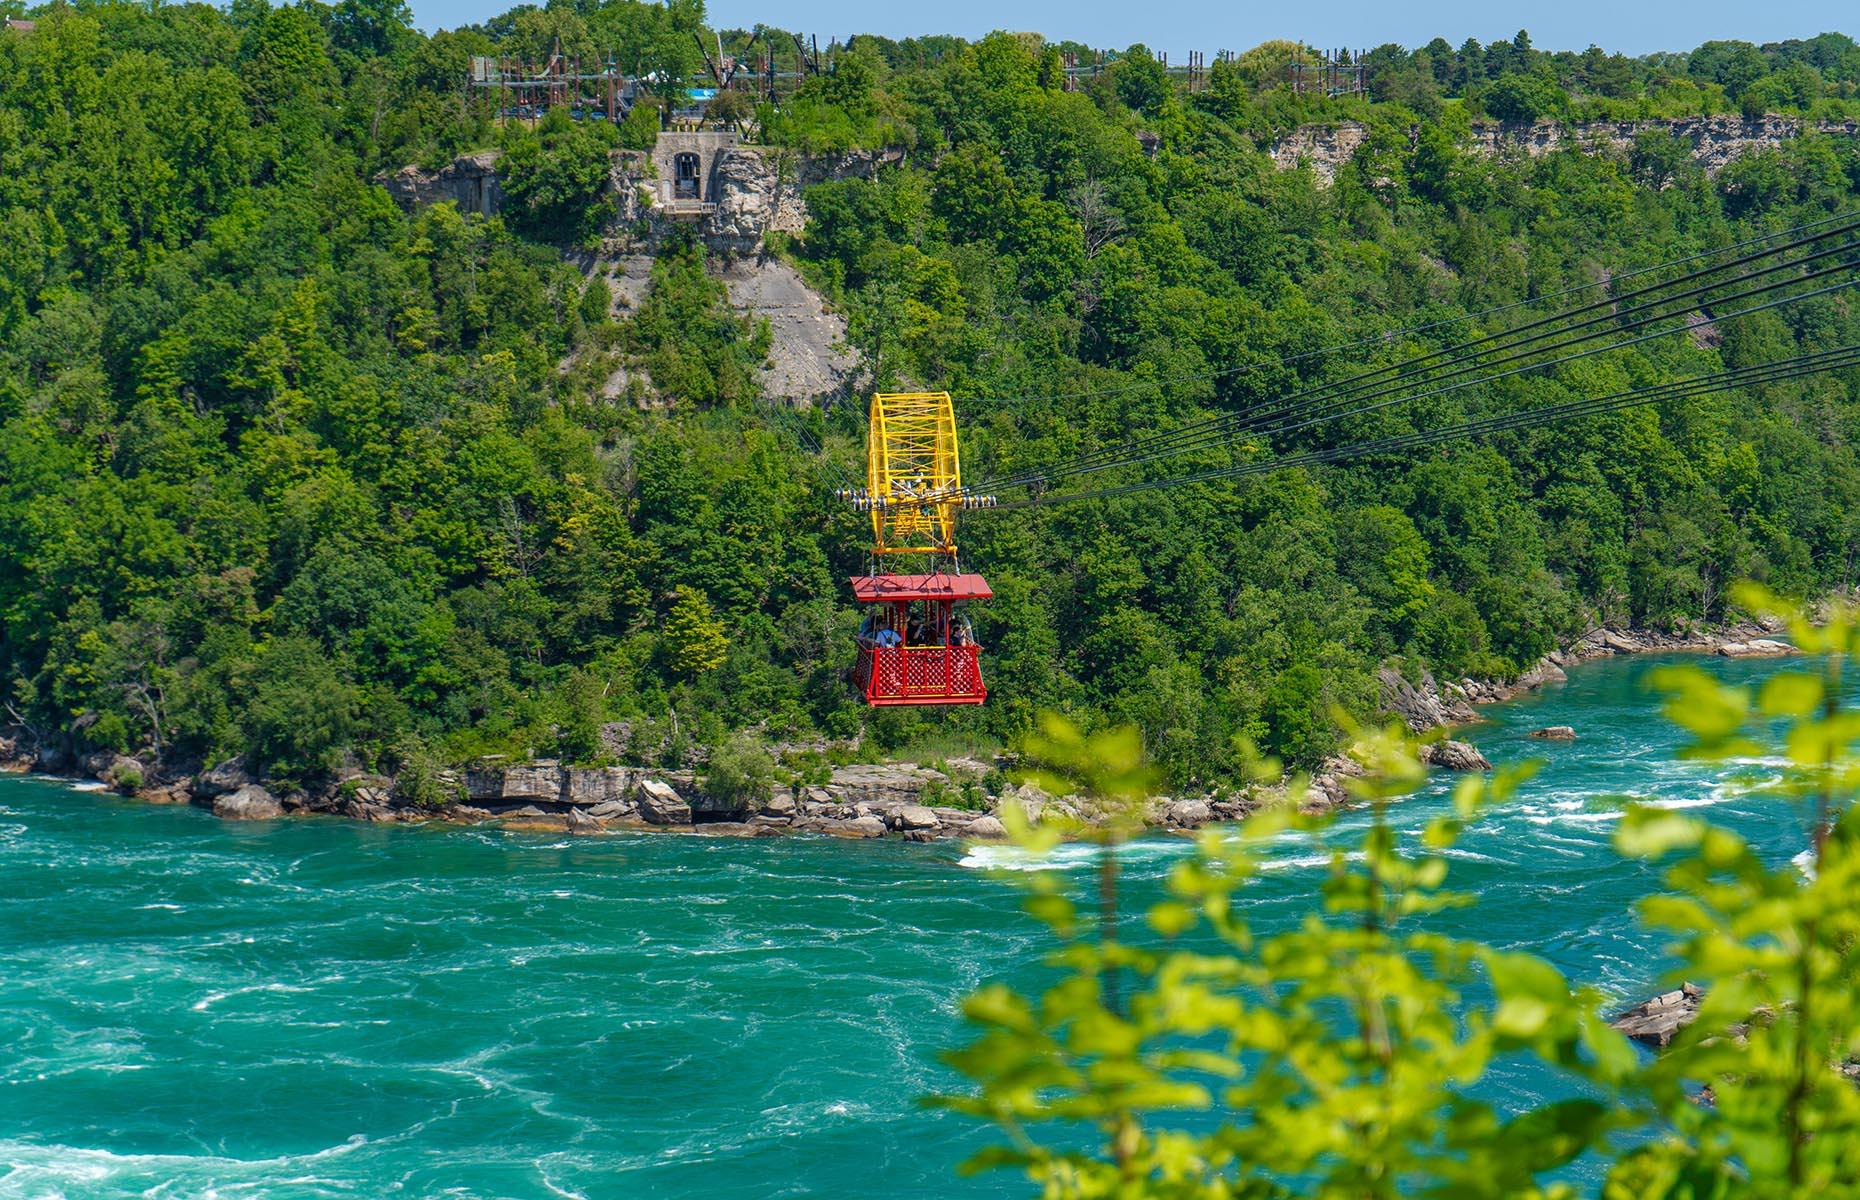 Once on board, you’ll witness the whitewater rapids and swirling Niagara Whirlpool as the car crosses the international border between Canada and the US; don’t worry, you won’t need your passport. The whirlpool is created at the end of the rapids where the gorge forces the river to suddenly turn counterclockwise. Your camera won’t do this mesmerizing natural phenomenon justice.